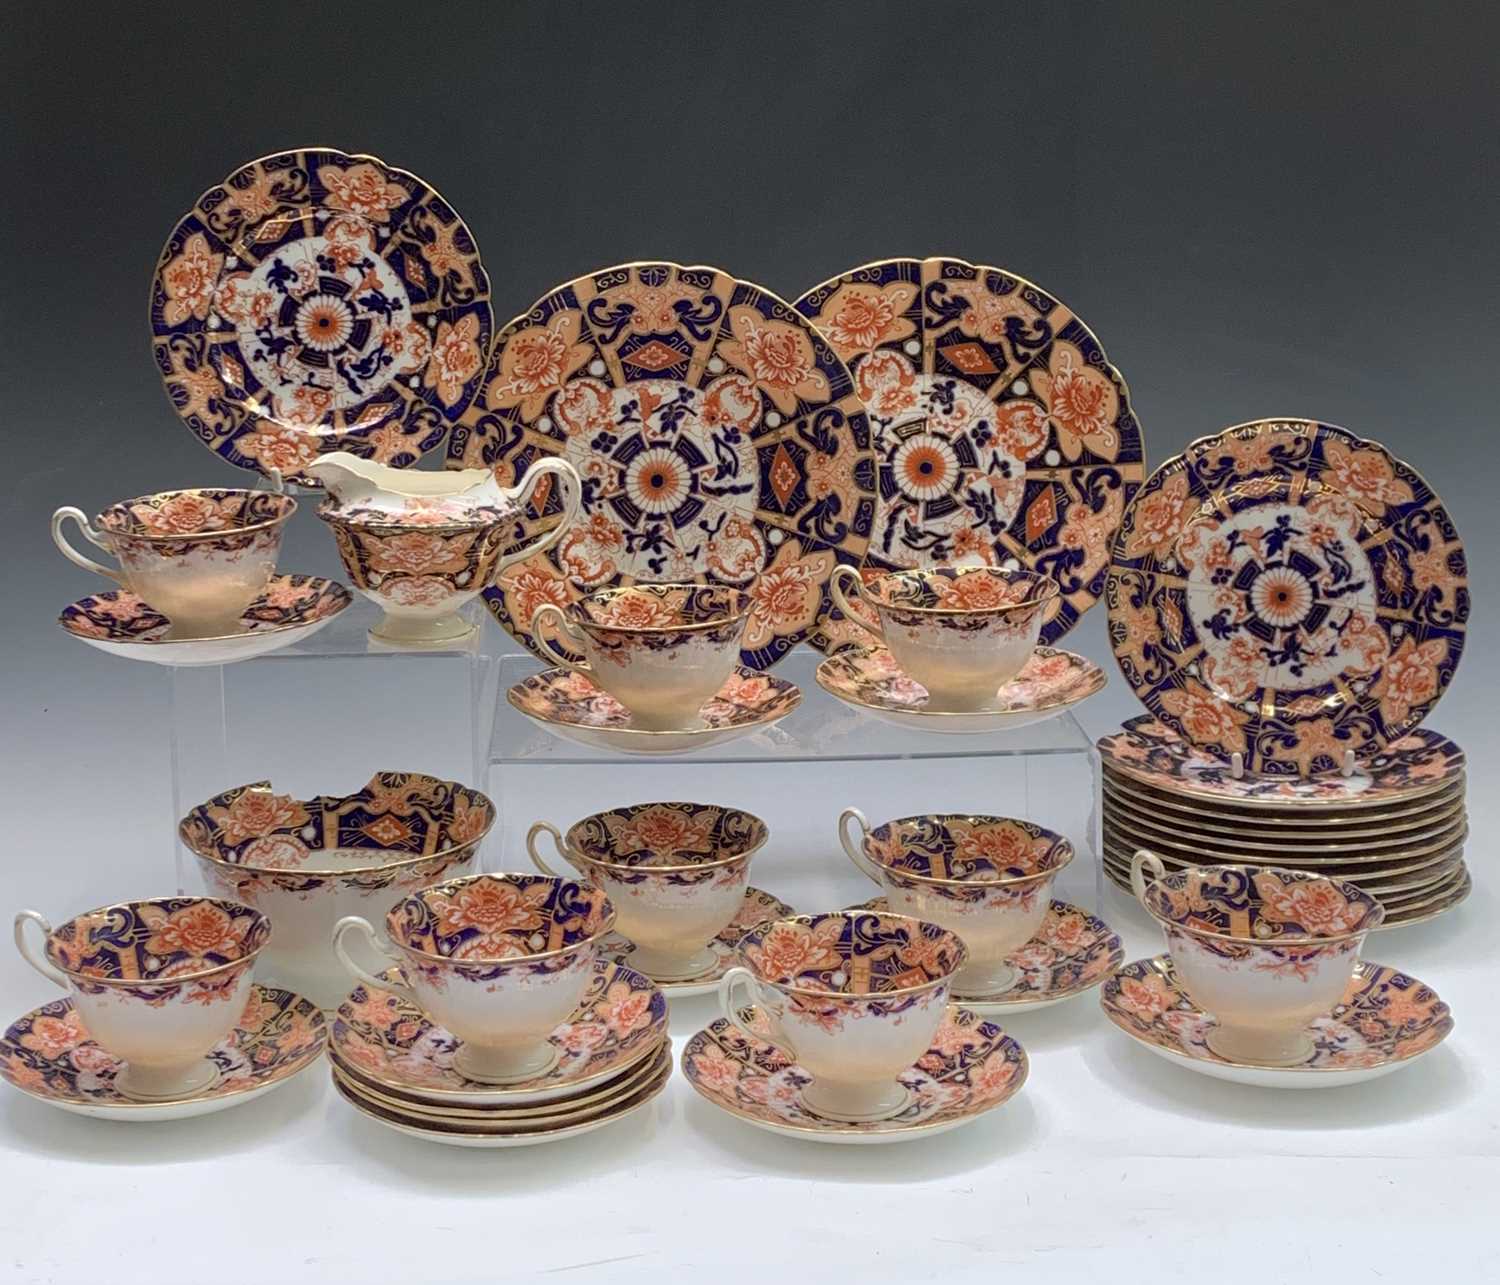 A late 19th/early 20th century Wileman 'Japan' pattern service, with printed marks and